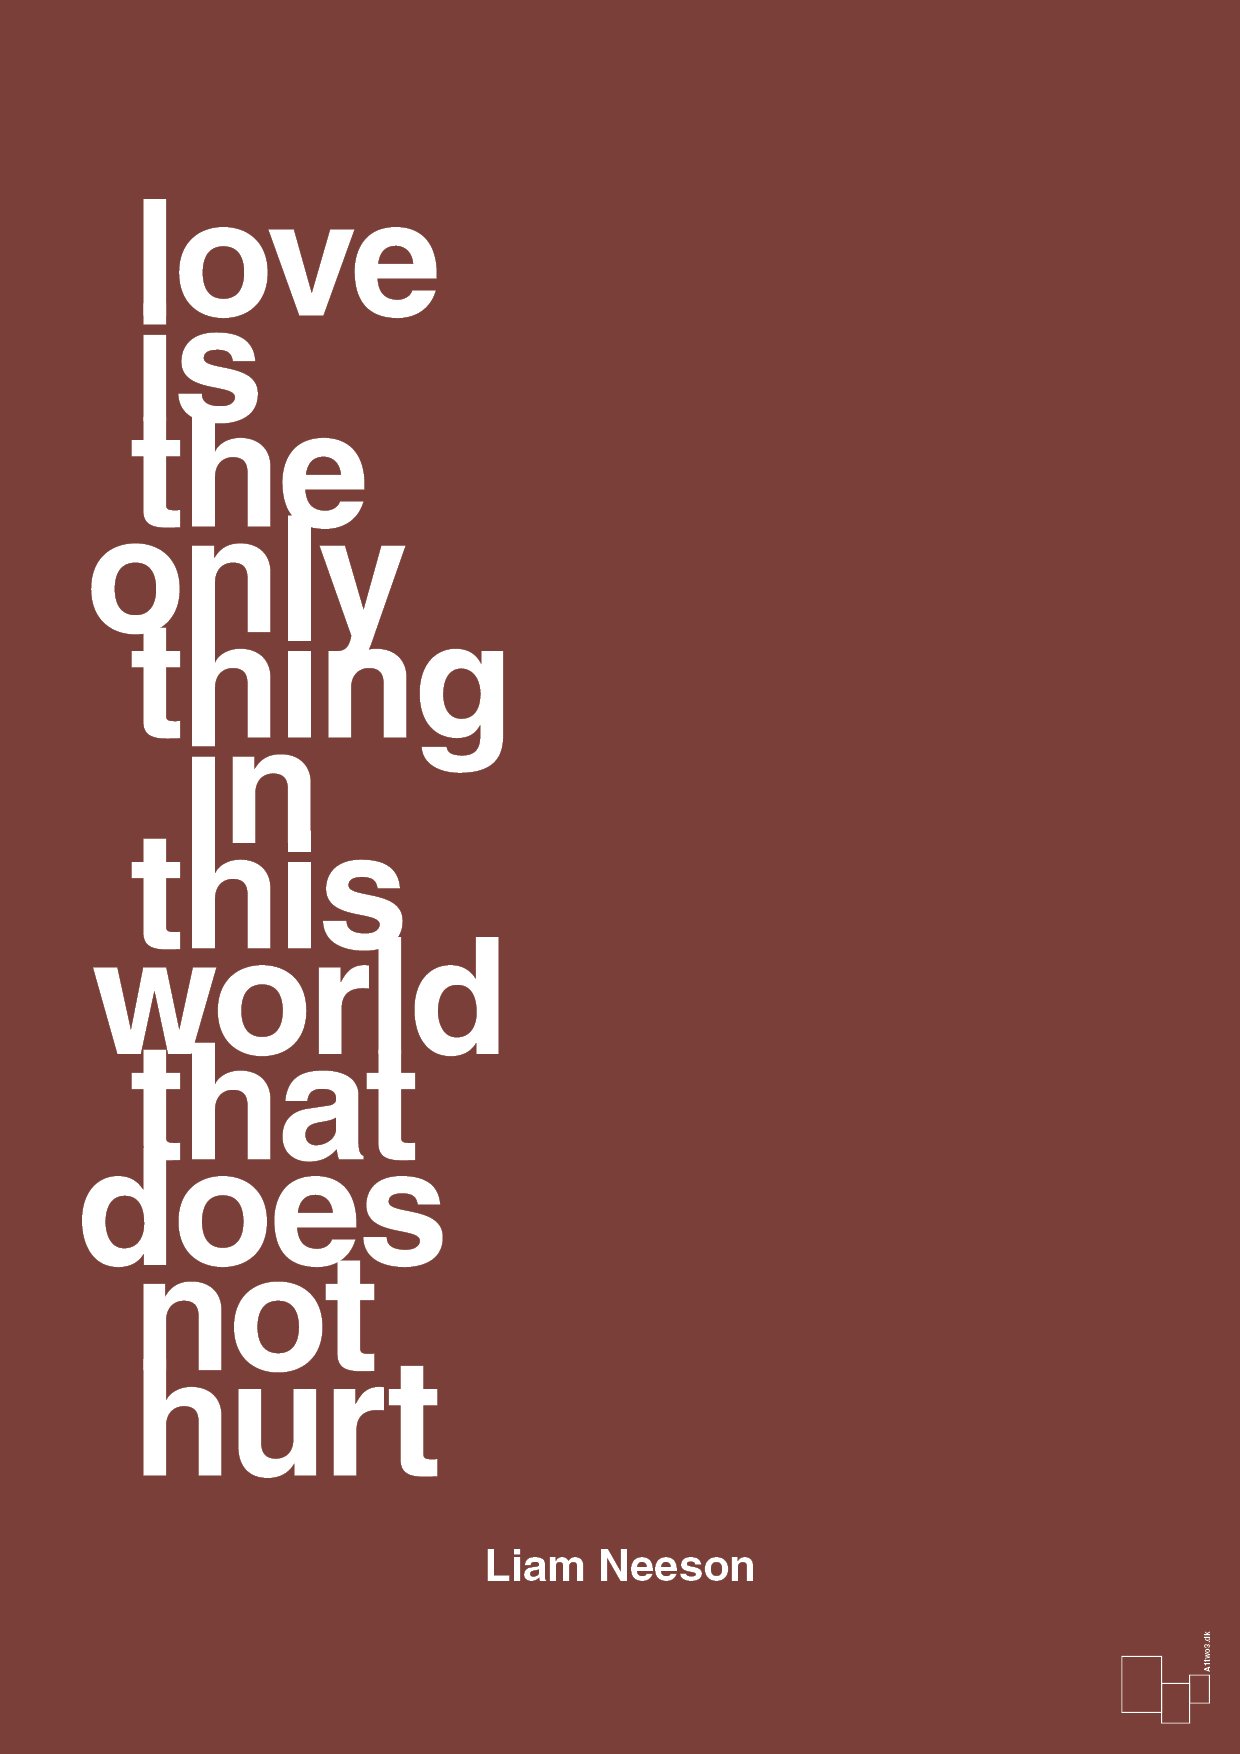 love is the only thing in this world that does not hurt - Plakat med Citater i Red Pepper